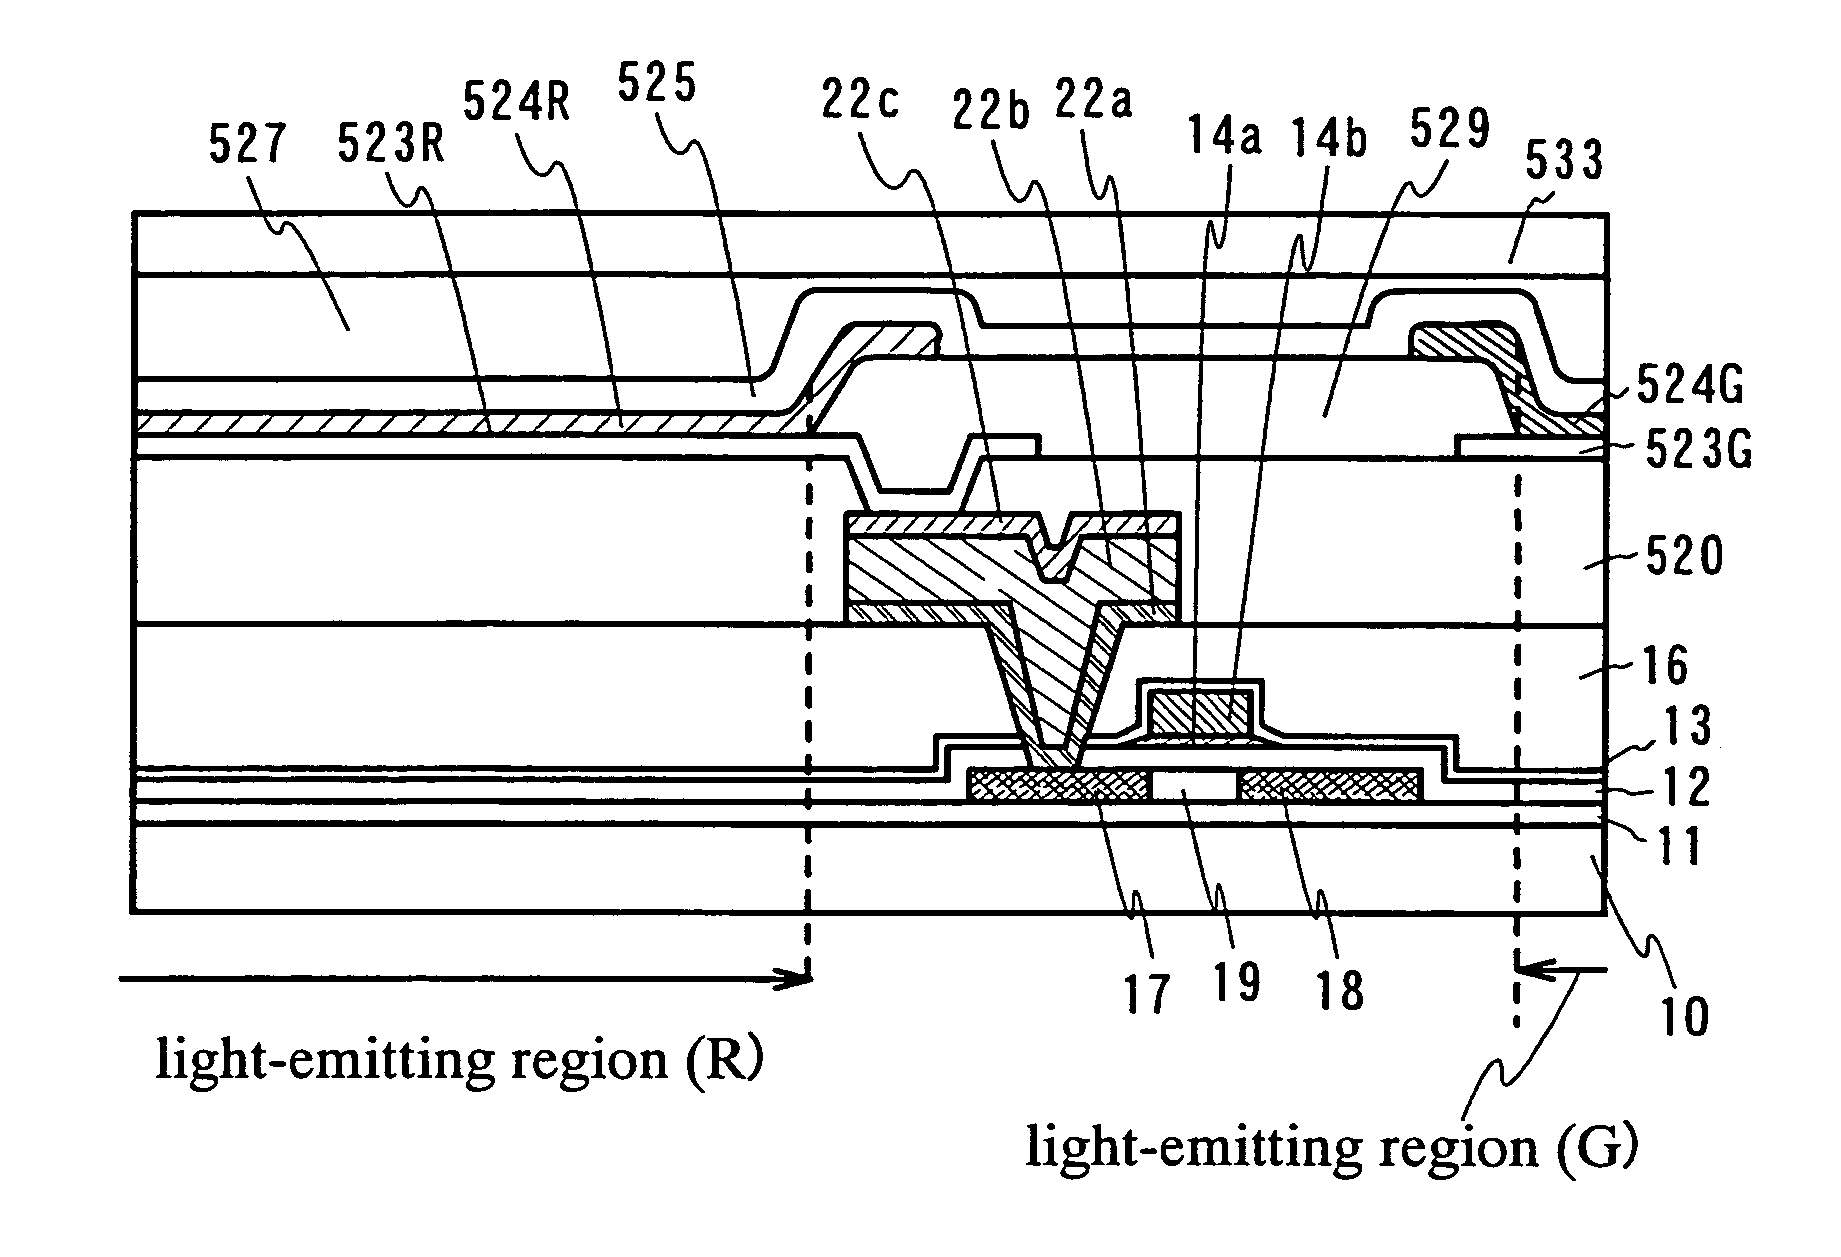 Semiconductor device having a wiring including an aluminum carbon alloy and titanium or molybdenum